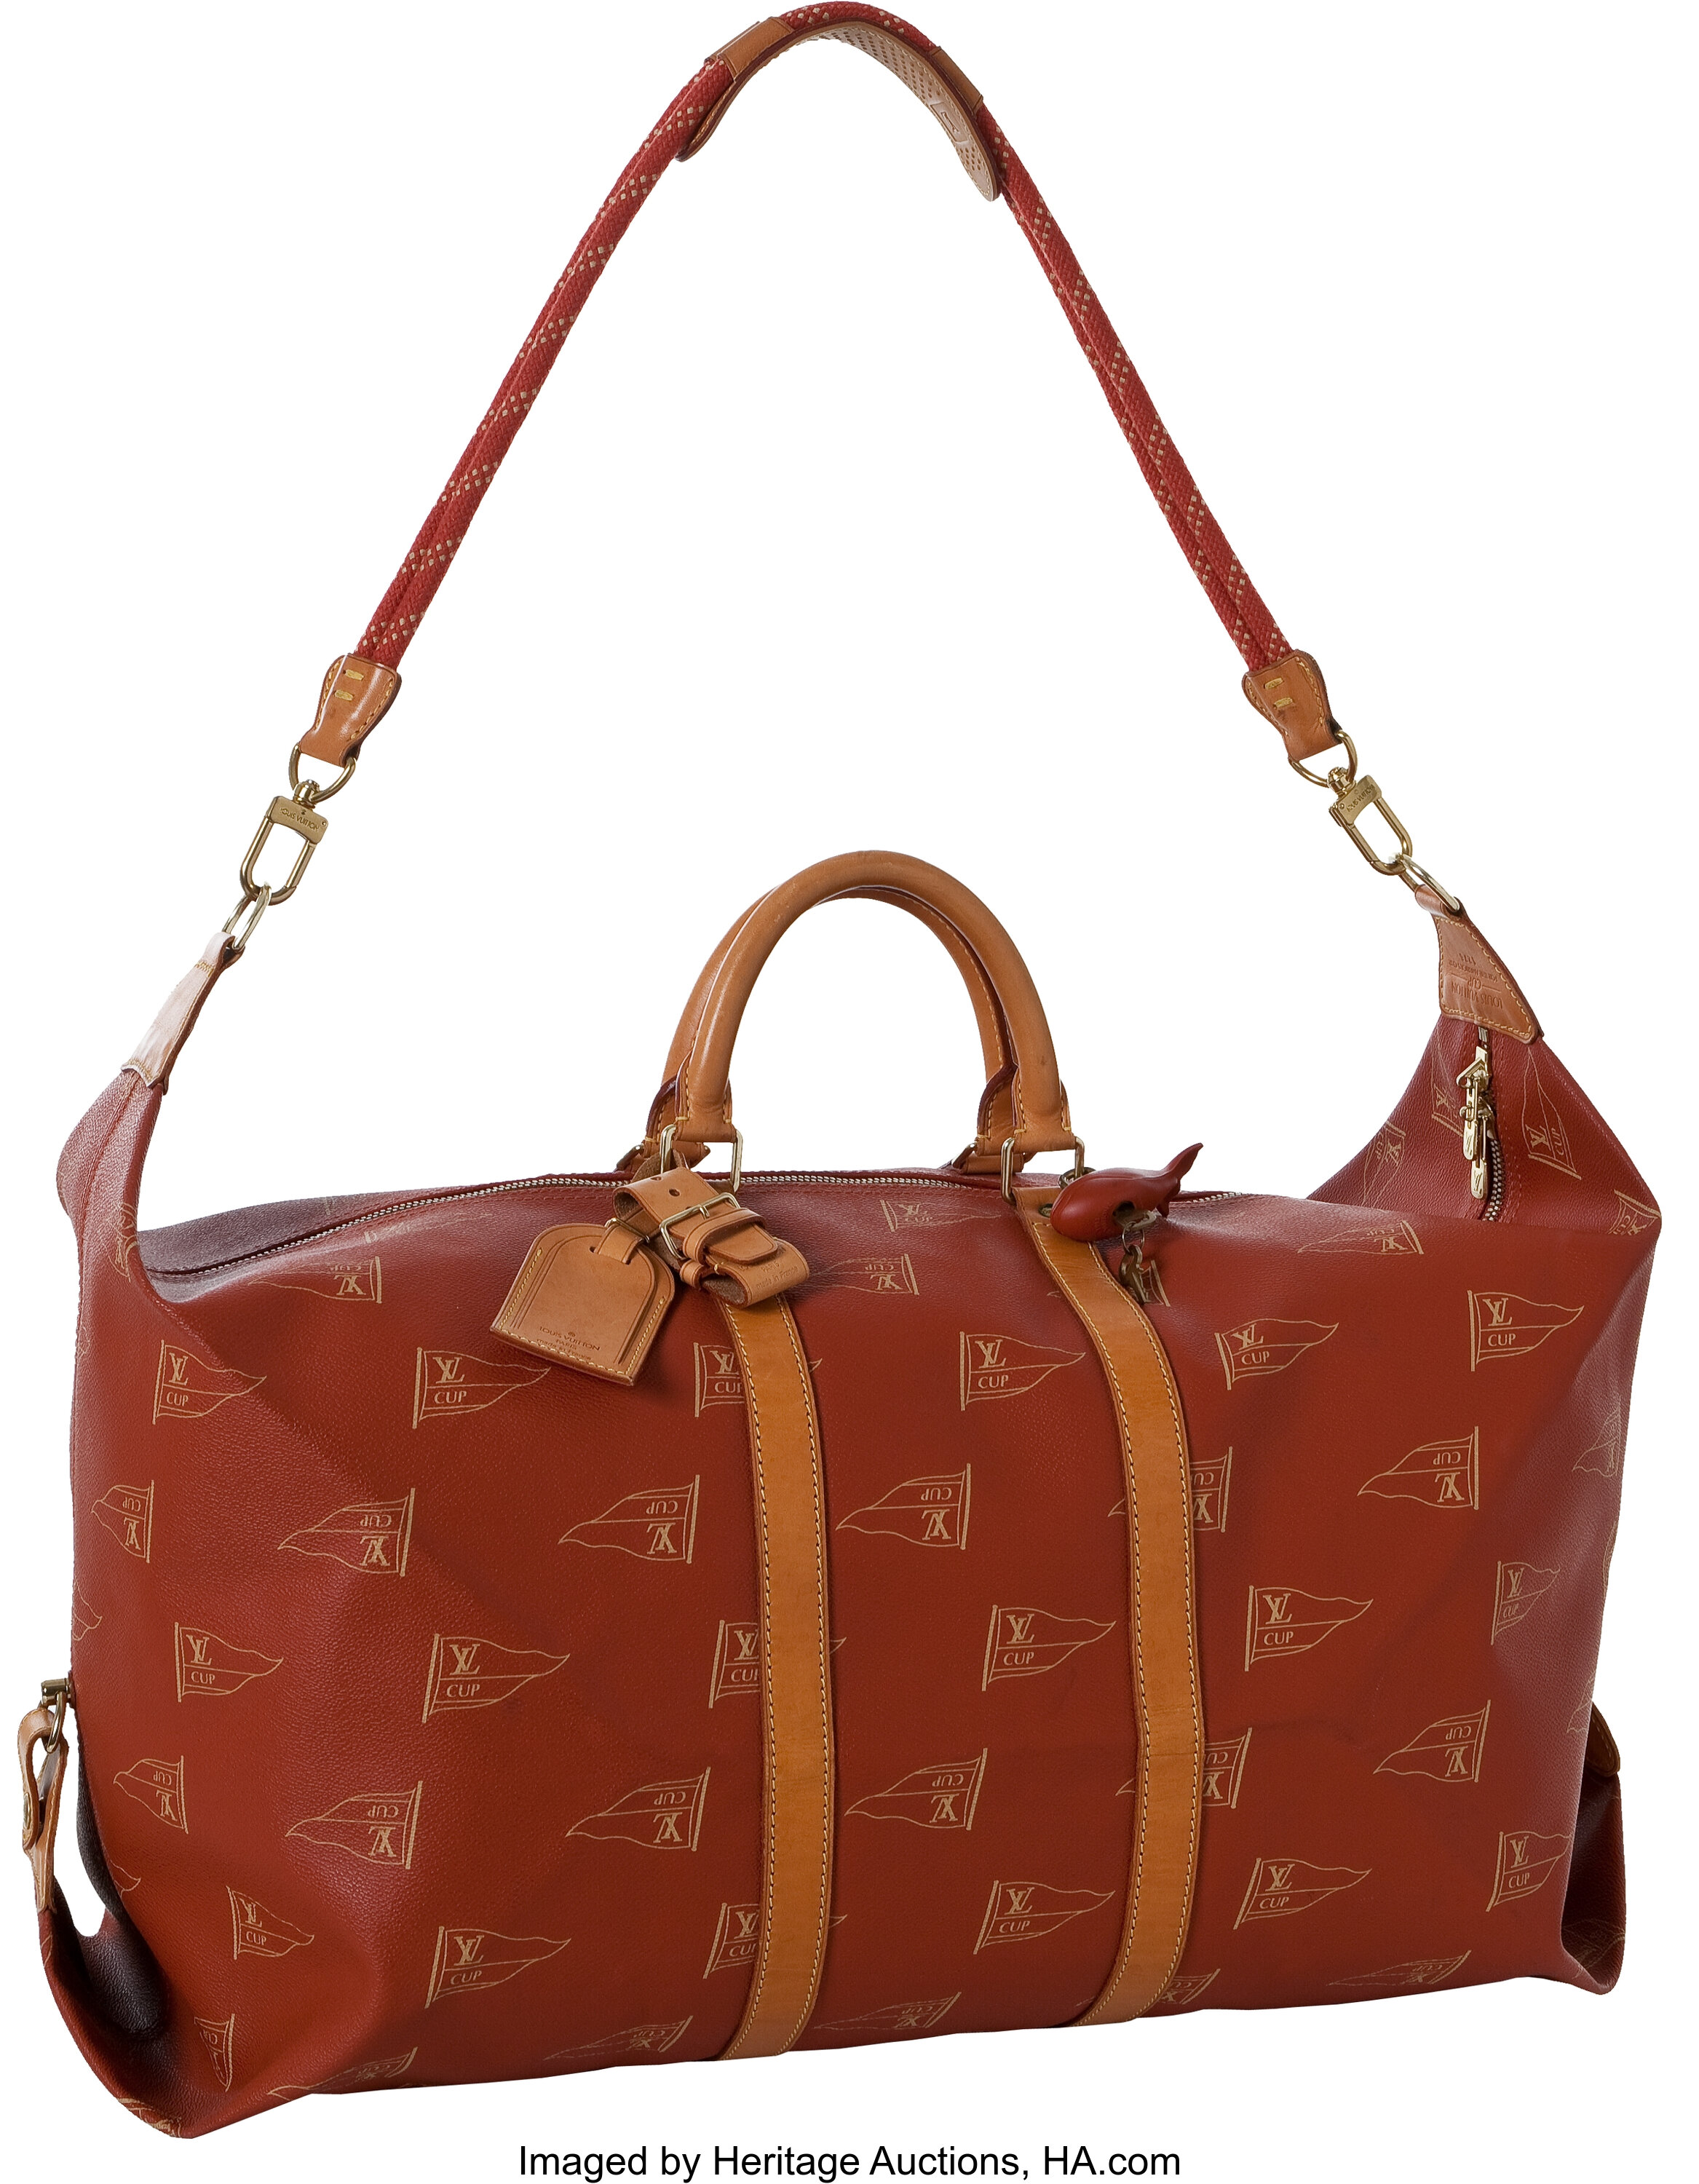 Sold at Auction: Louis Vuitton, Louis Vuitton Keep All Weekend